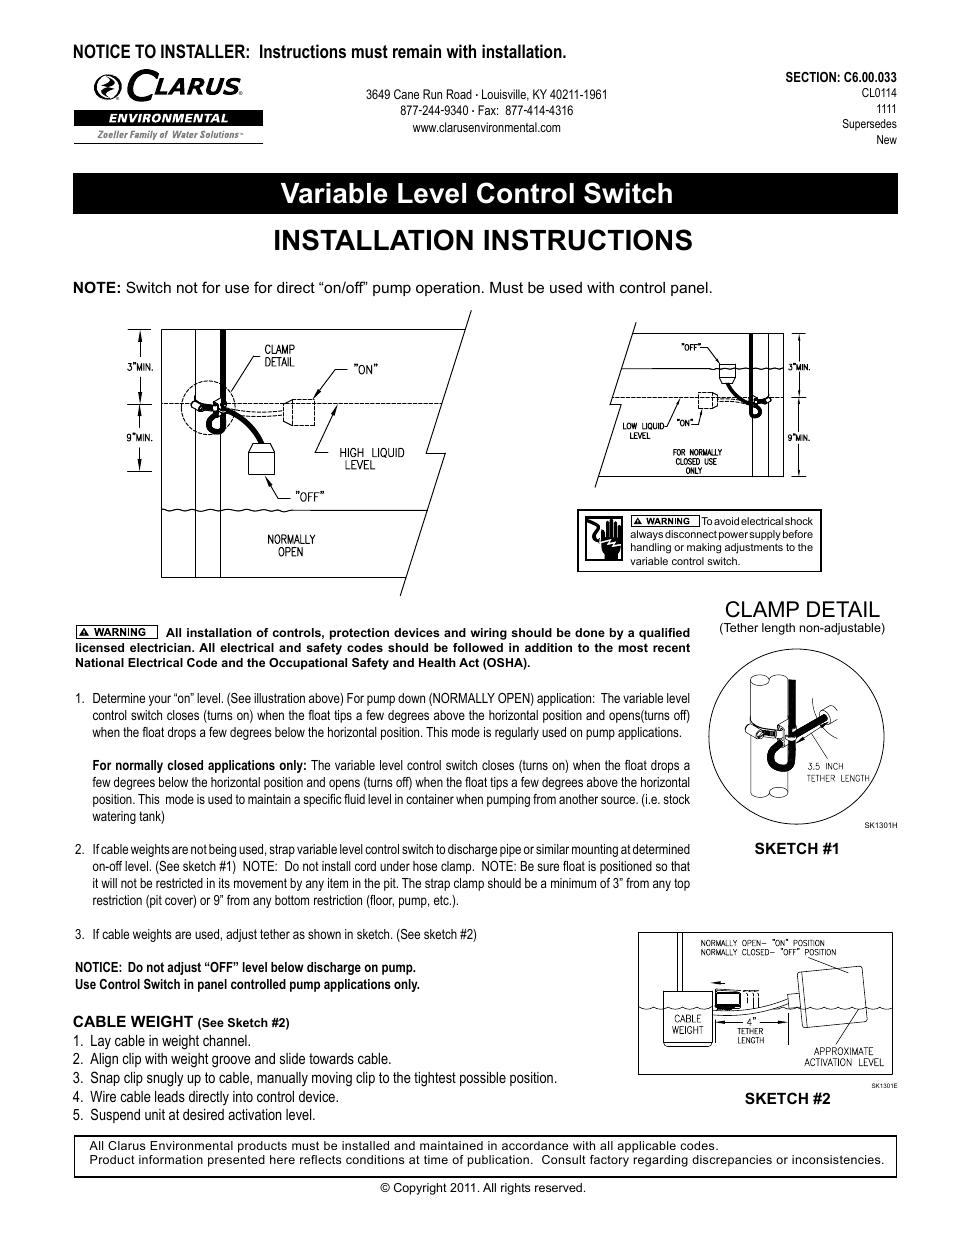 Variable Level Control Switch